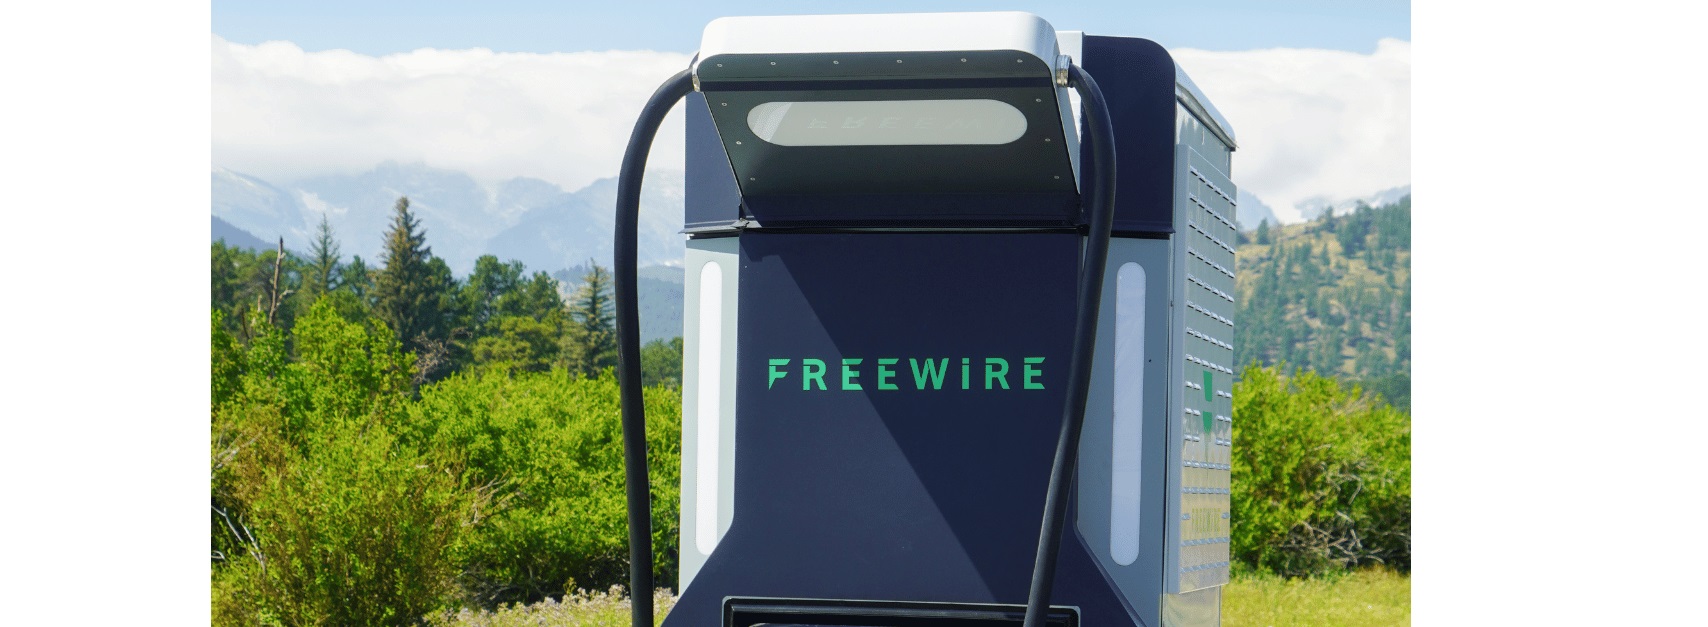 FreeWire technologies files patent for EV charging control method